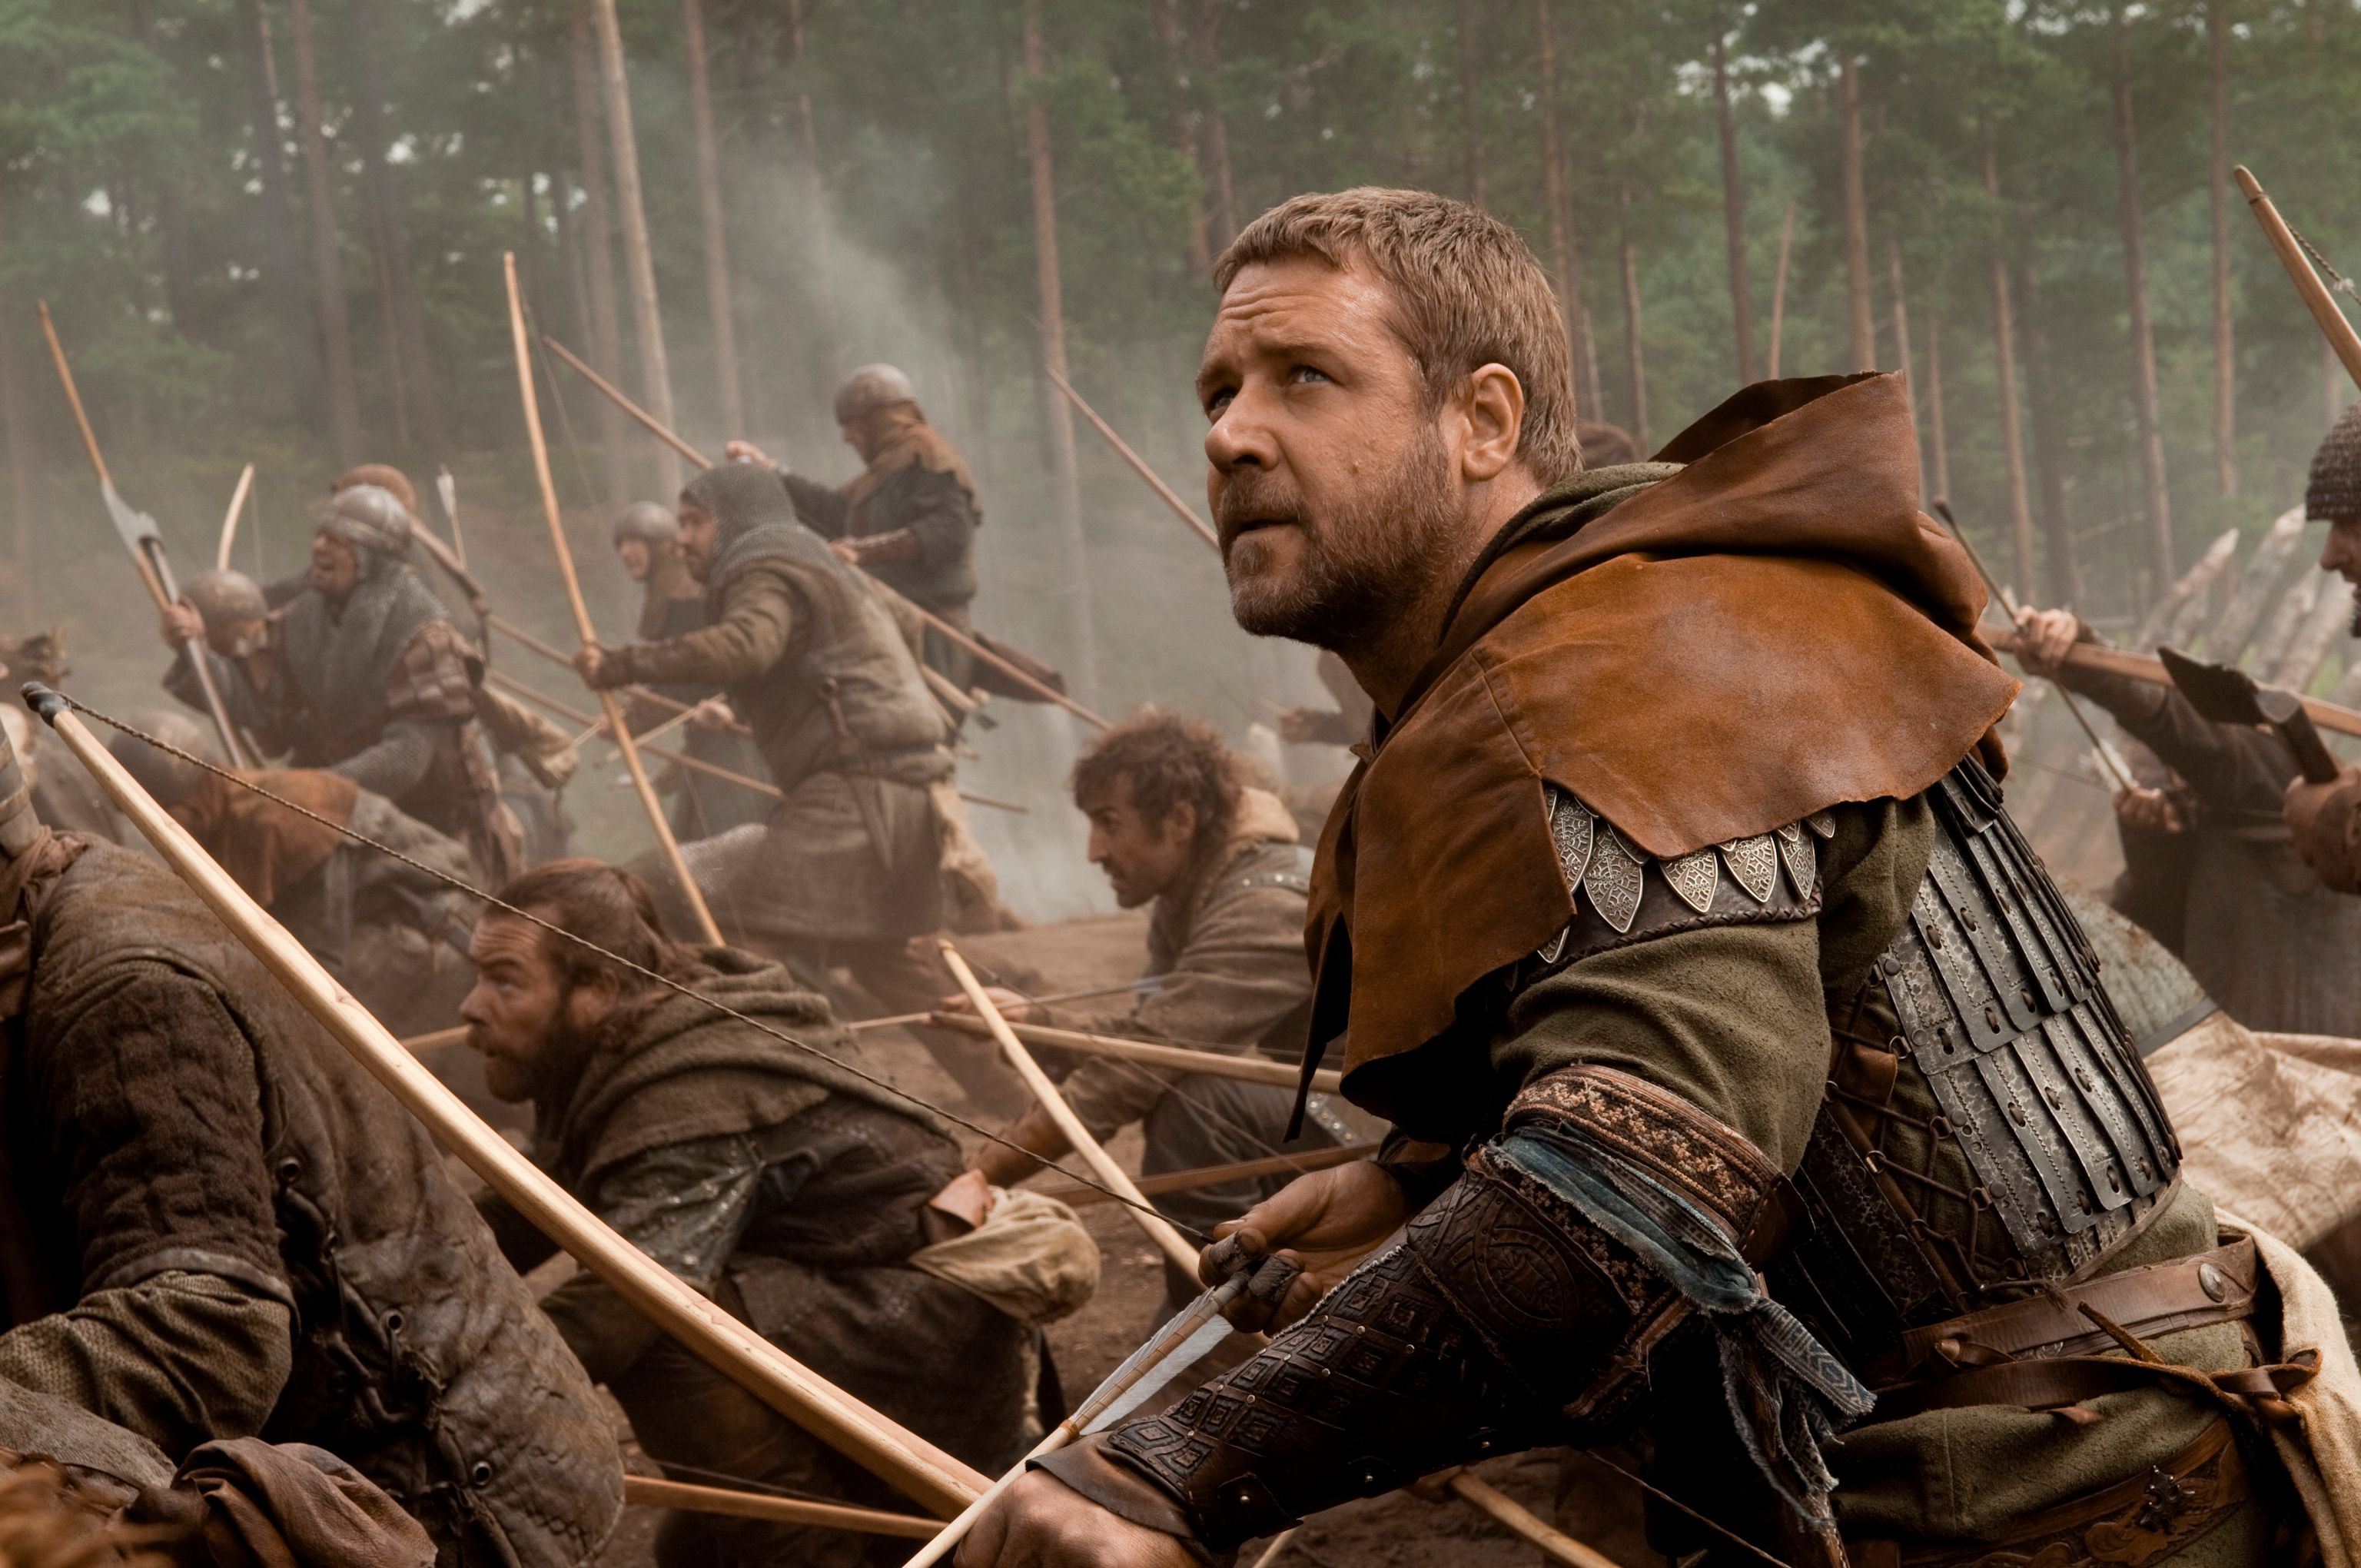 Russell Crowe goes into battle